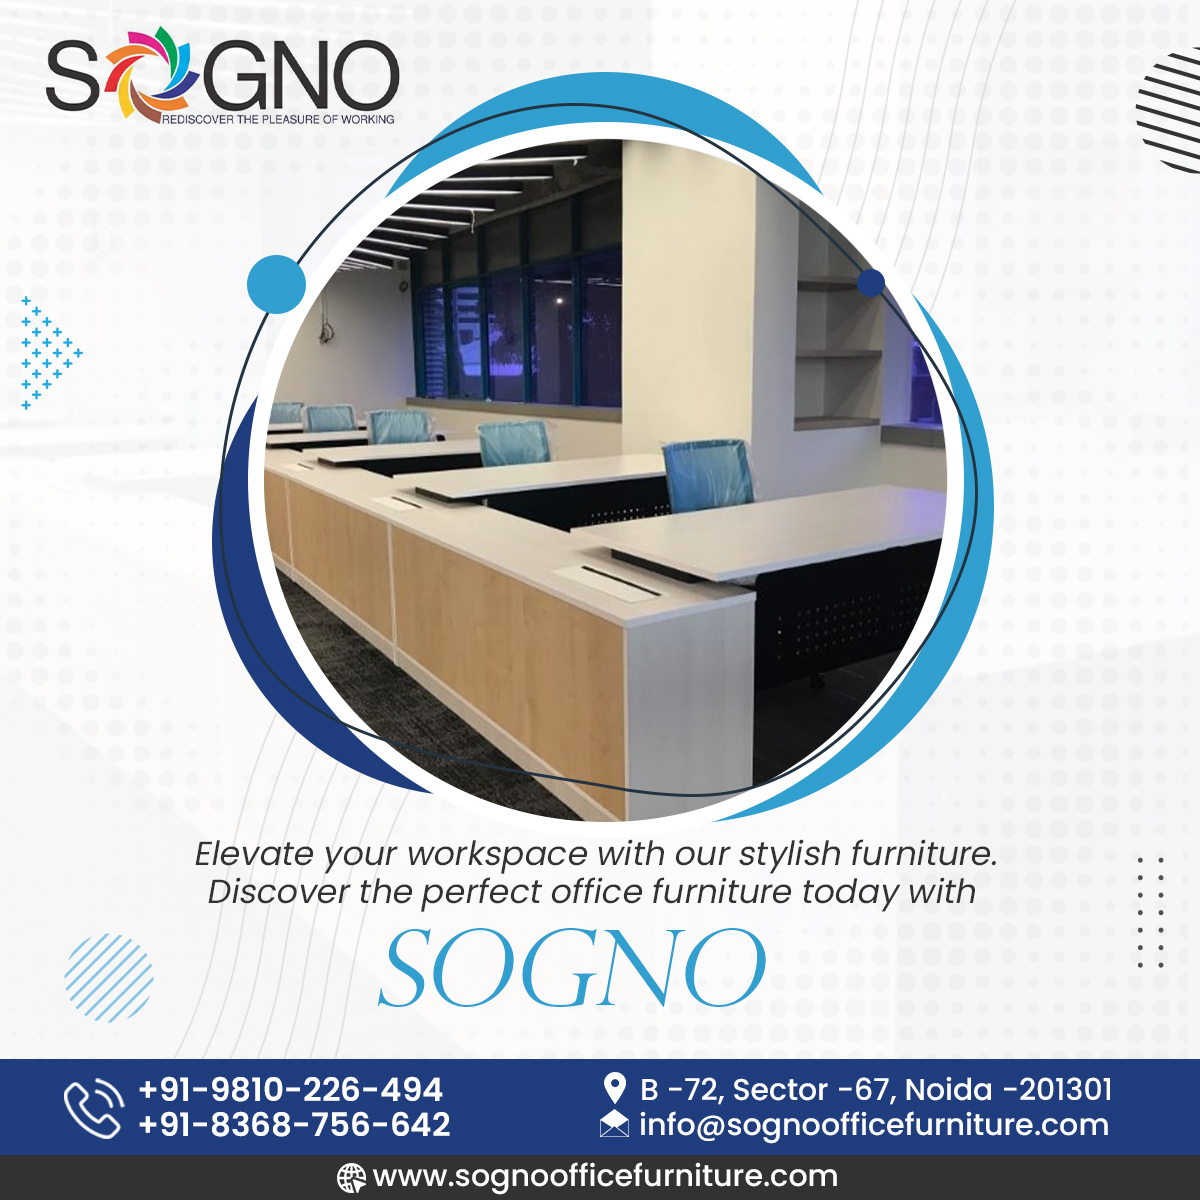 Are you looking for the perfect office furniture? Look no further than Sogno!
.
.
#sognoofficefurniture #officefurniture #business #manufacturer #officefurniturecenter #interiørdesign #chairs #chairdesign #officechairs #workstationsetup #officetable #conferencetable